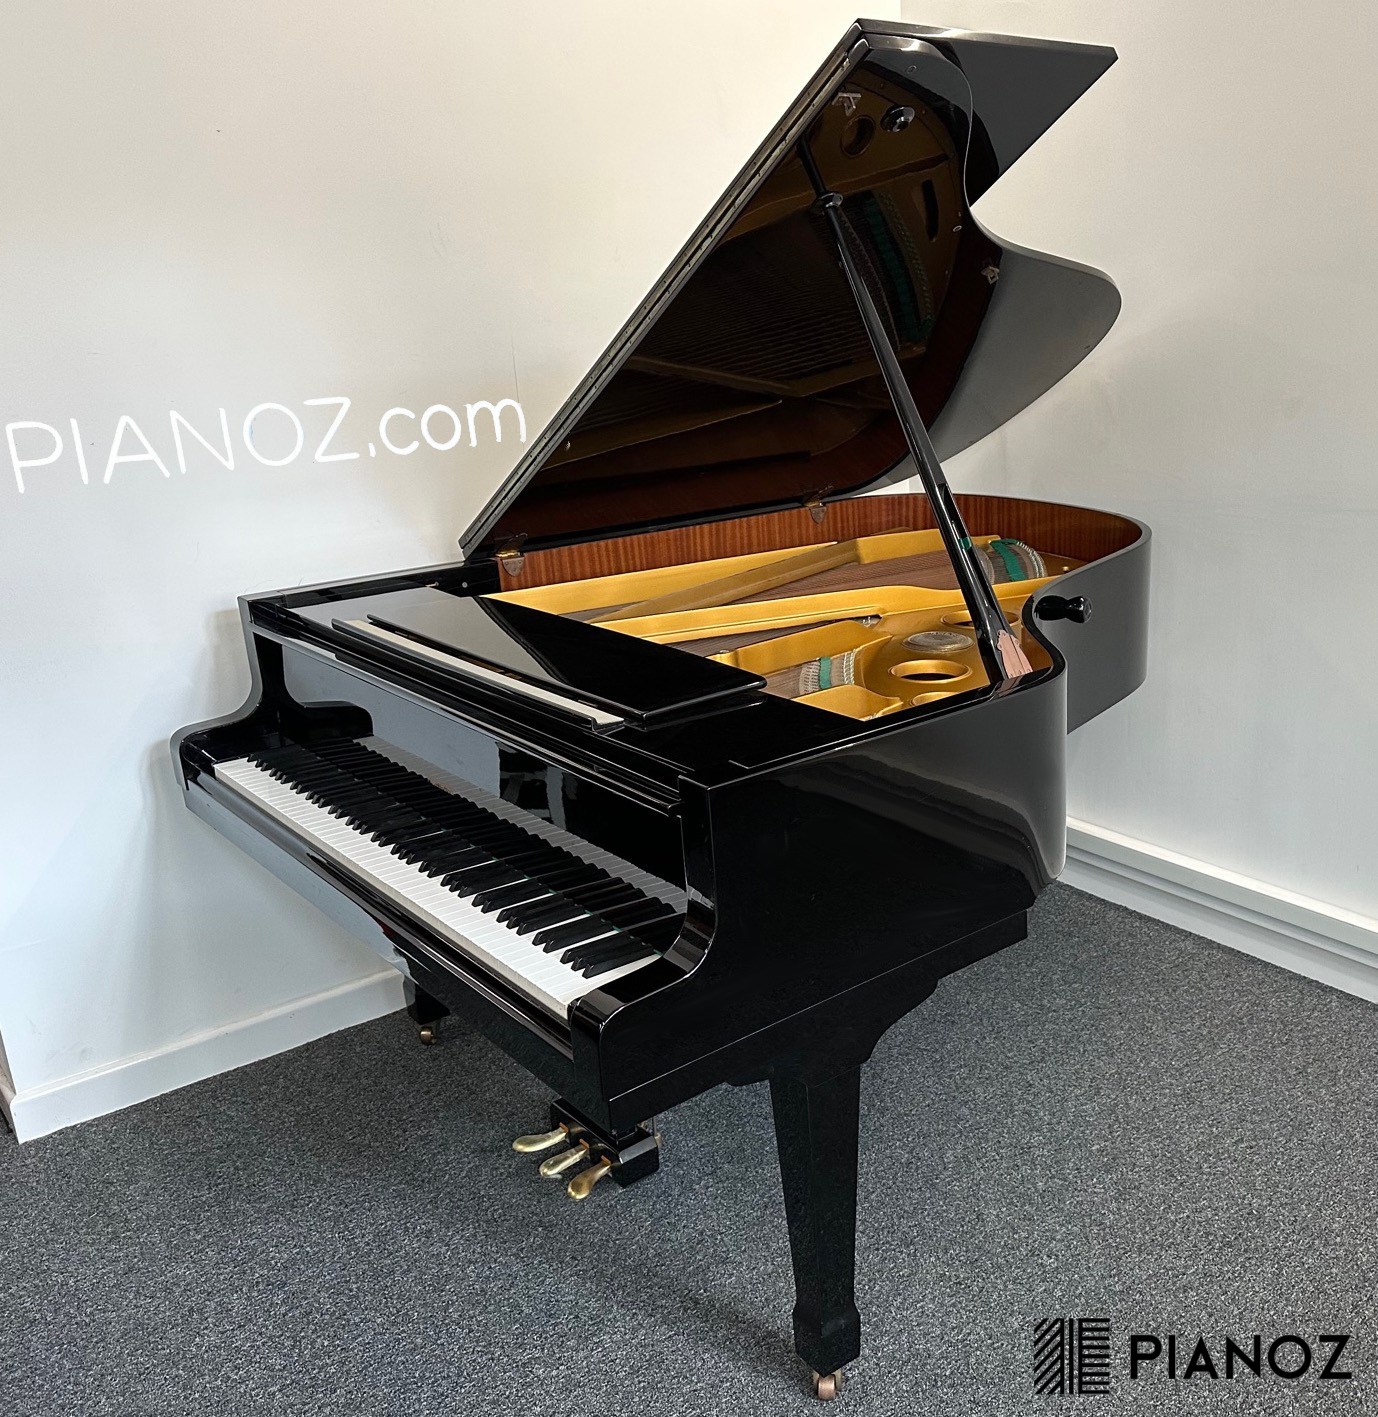 Weinbach by Petrof 198 Grand Piano piano for sale in UK